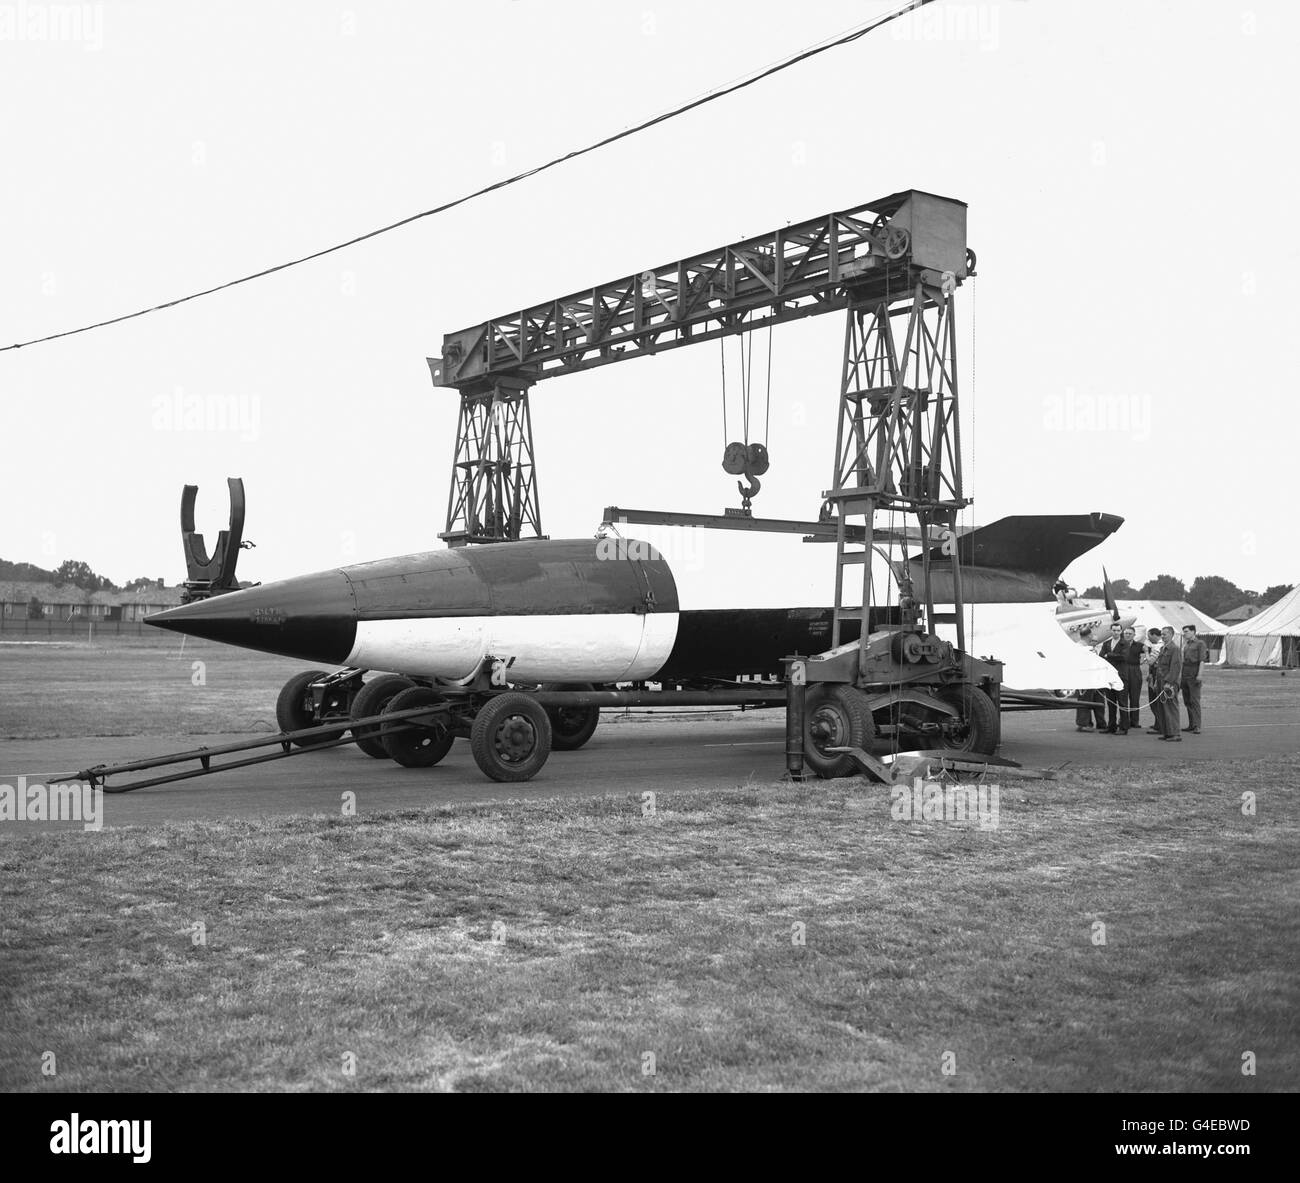 A German V2 rocket being unloaded at Hendon aerodrome, Middlesex, for the three-day 'Fifty Years of Flying' show. The V2 was made to reach a height of 70,000 ft and fly at 3,600 mph. It was the first type of wingless rocket projectile used in the Second World War. *This V2 has been in British hands since the Nazi rocket research station at Peenemunde was captured. Stock Photo